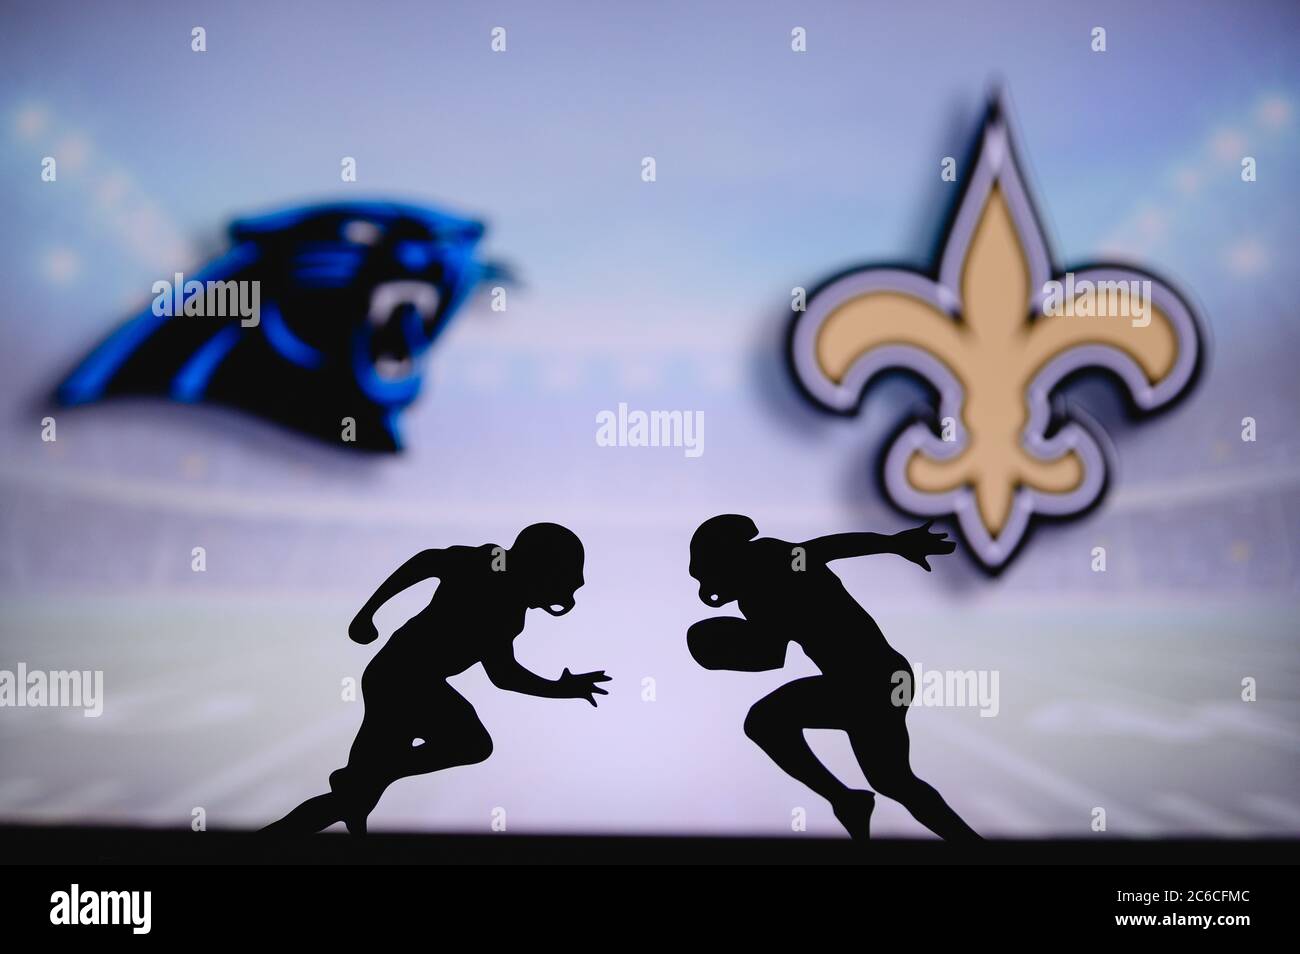 Carolina Panthers vs. New Orleans Saints. NFL match poster. Two american  football players silhouette facing each other on the field. Clubs logo in  bac Stock Photo - Alamy